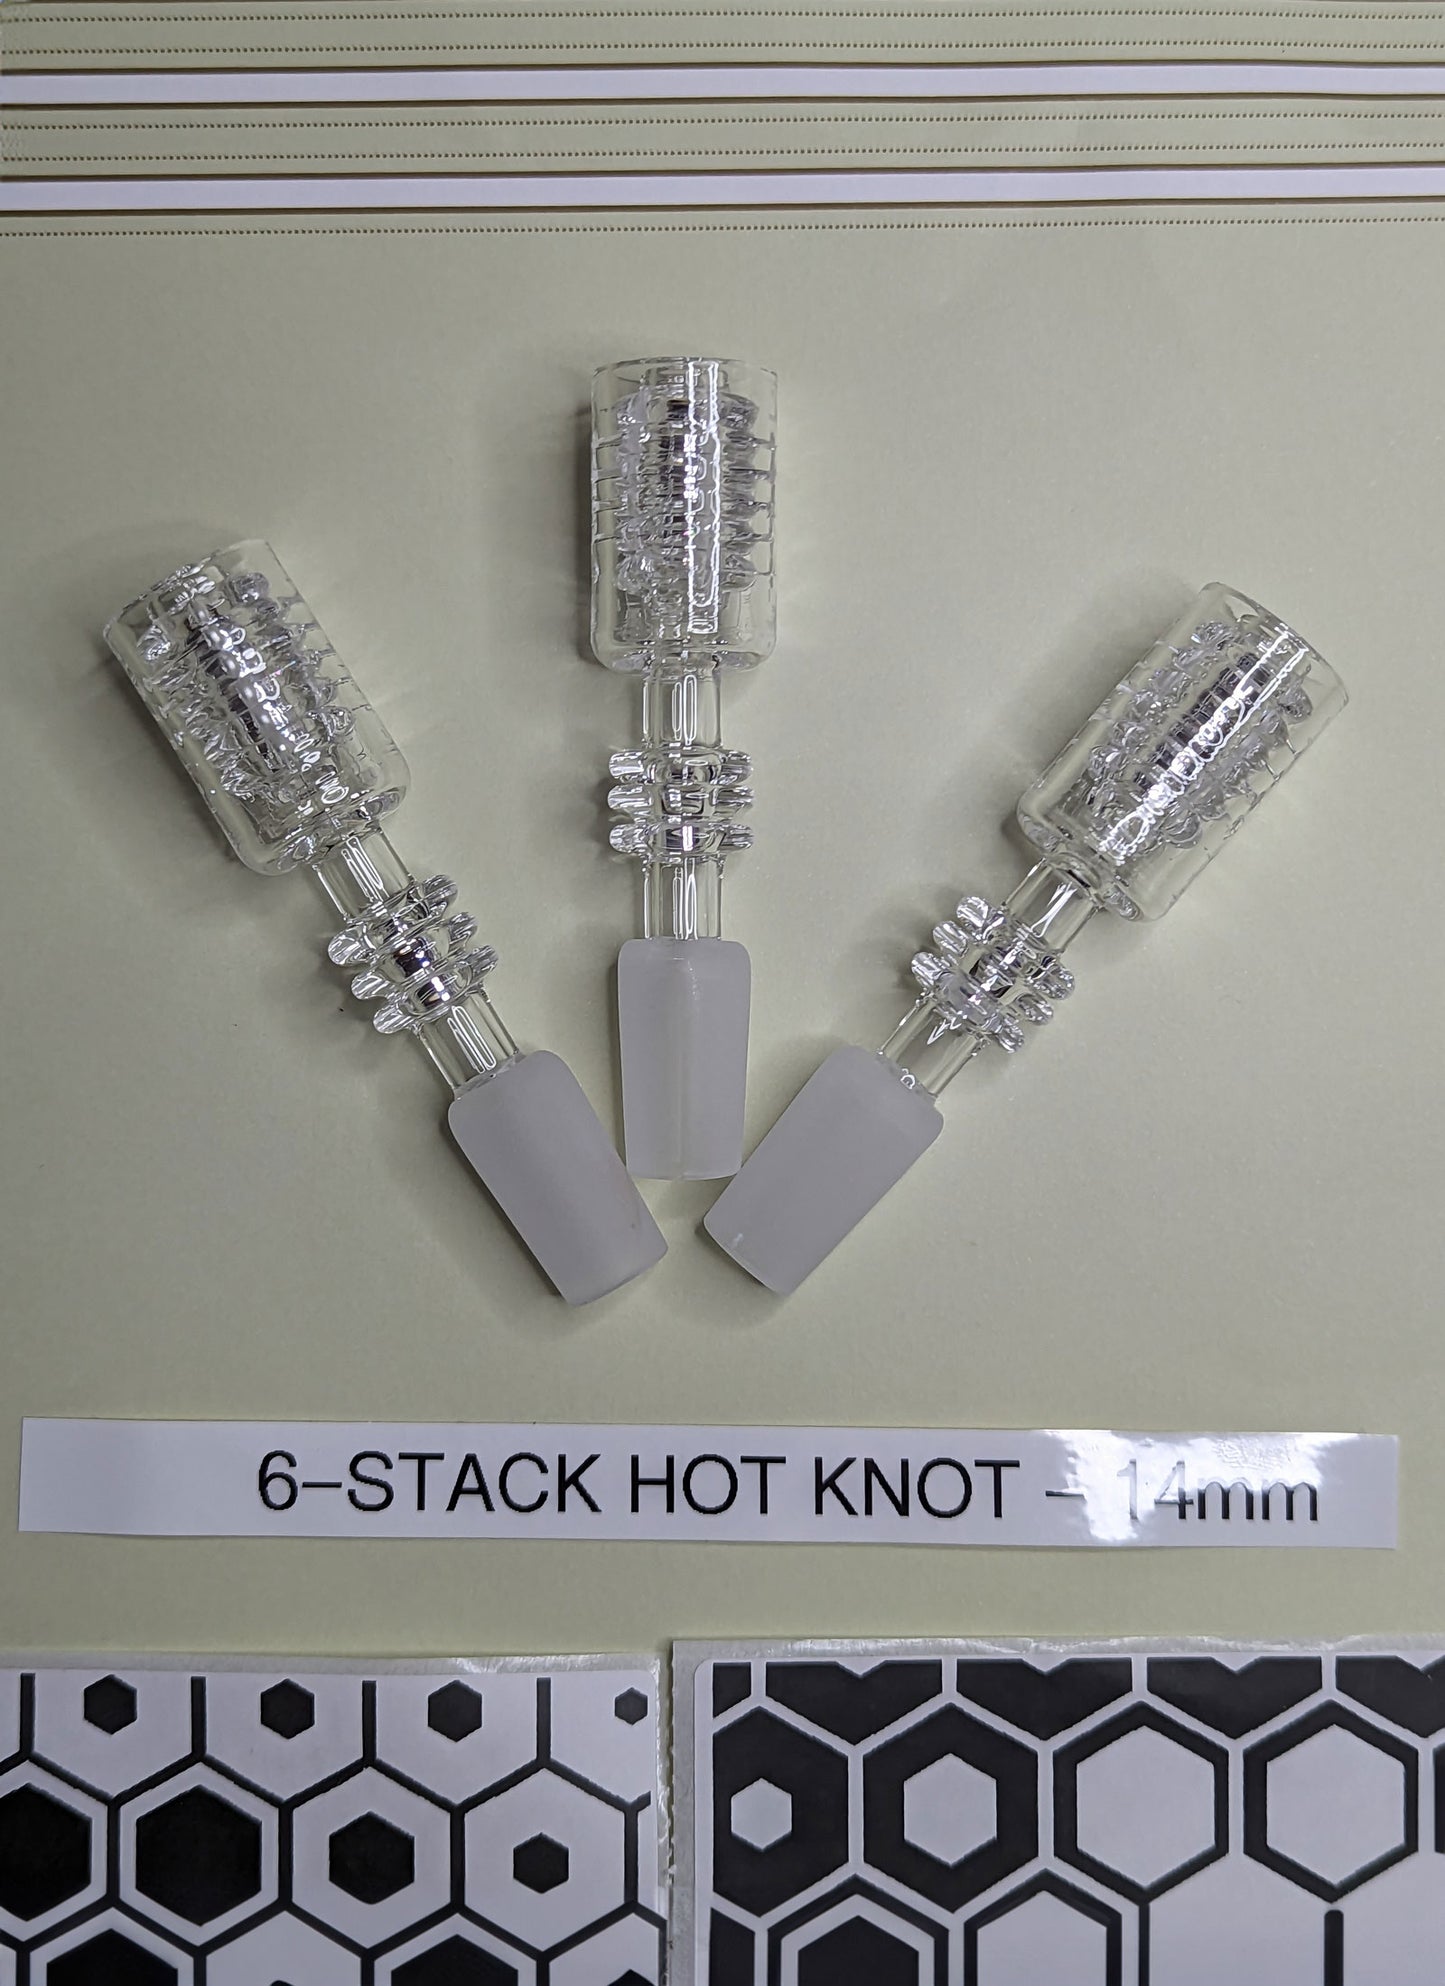 6-Stack Hot Knot - 14mm